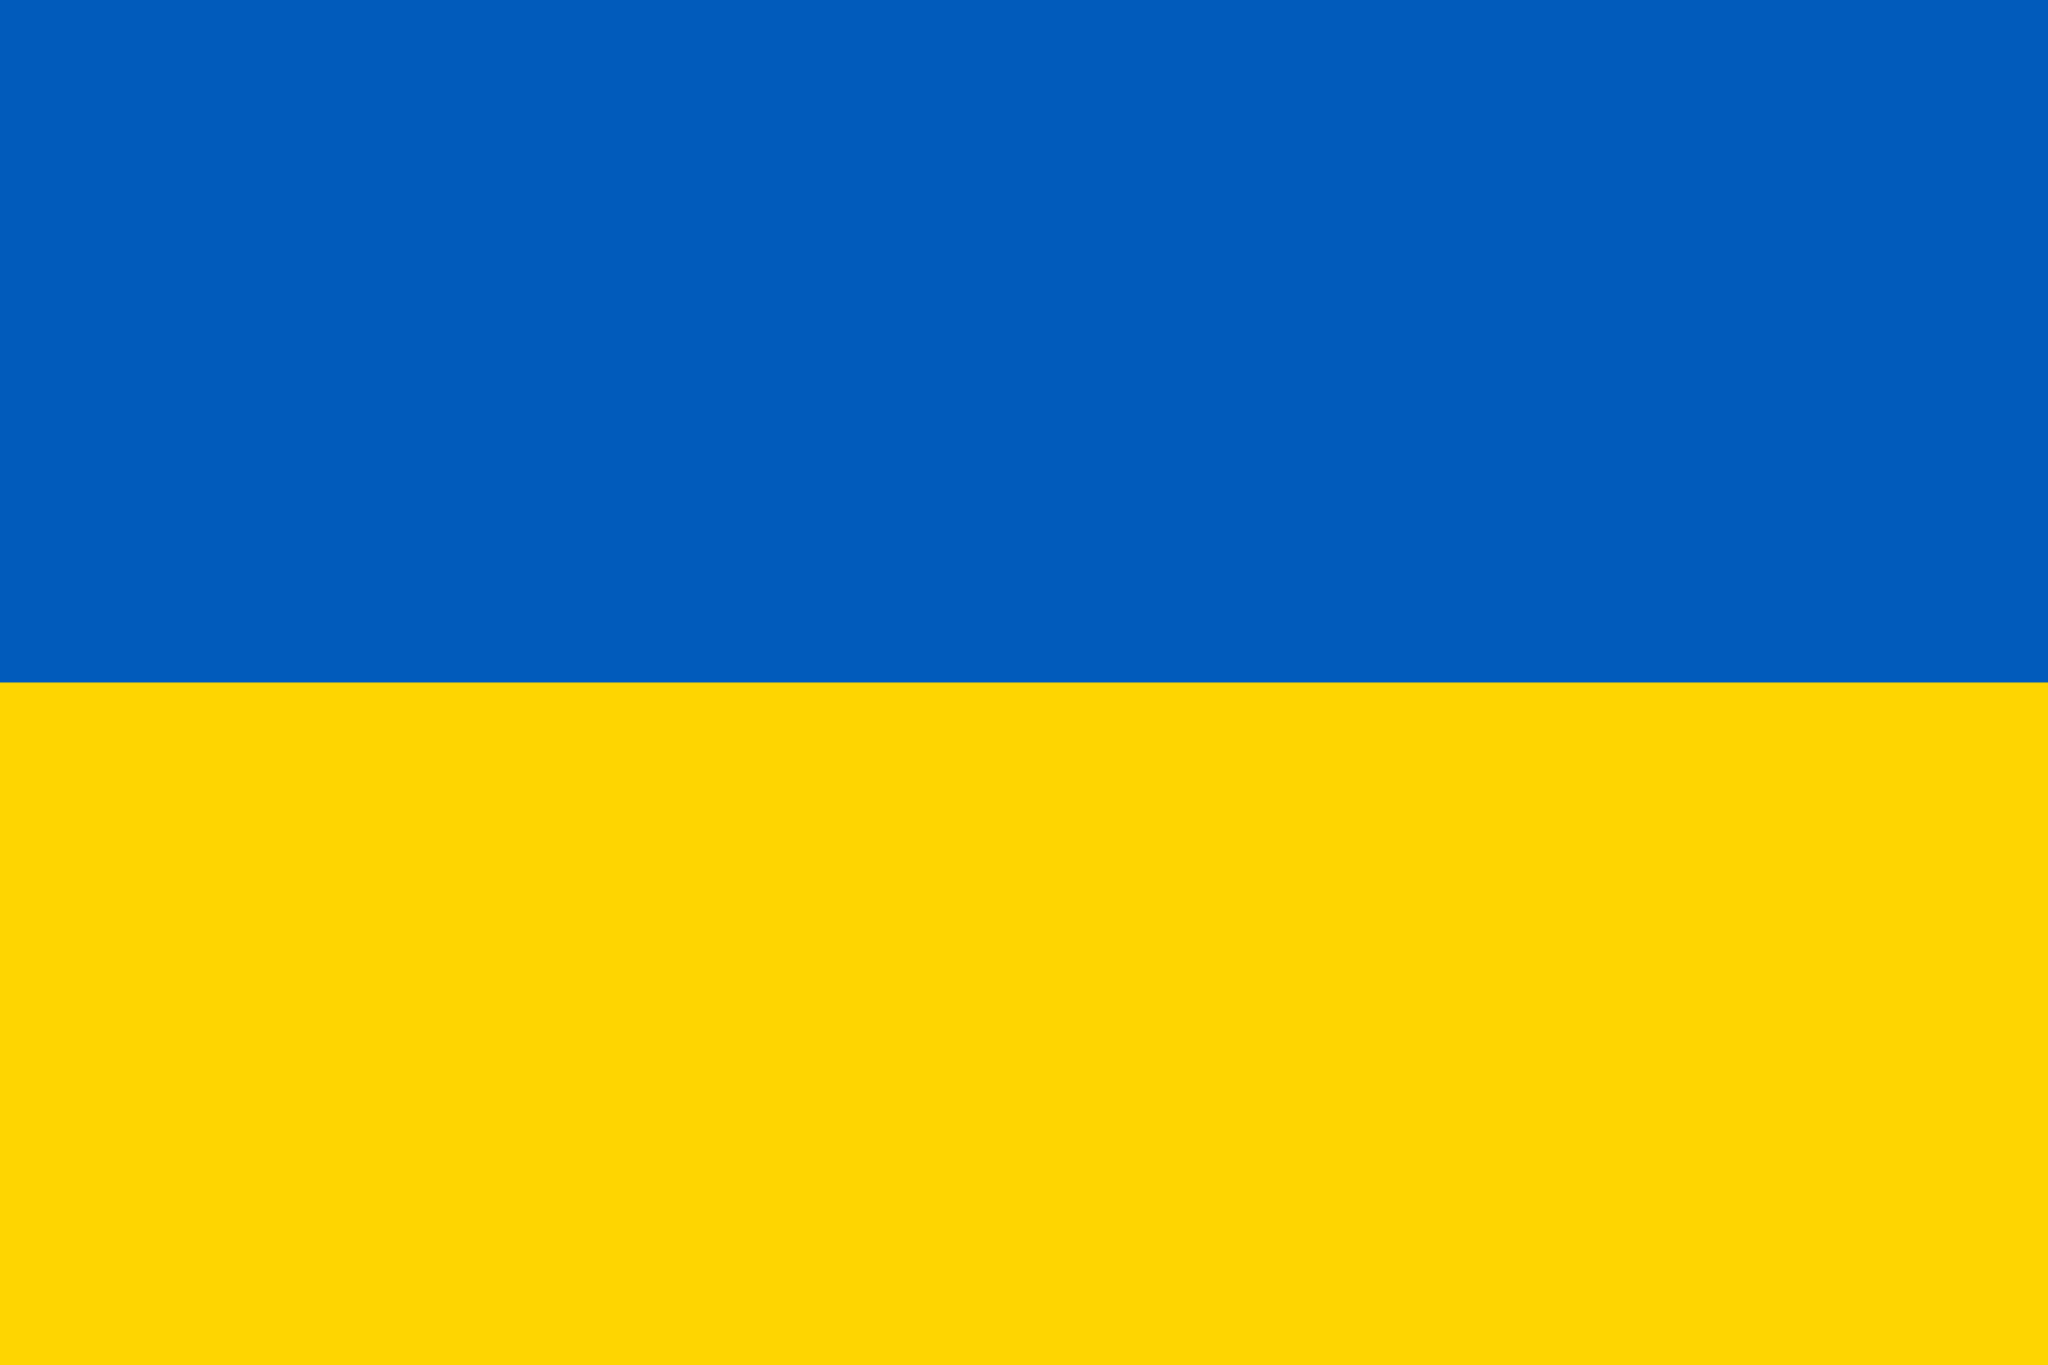 in support of the Ukrainian people